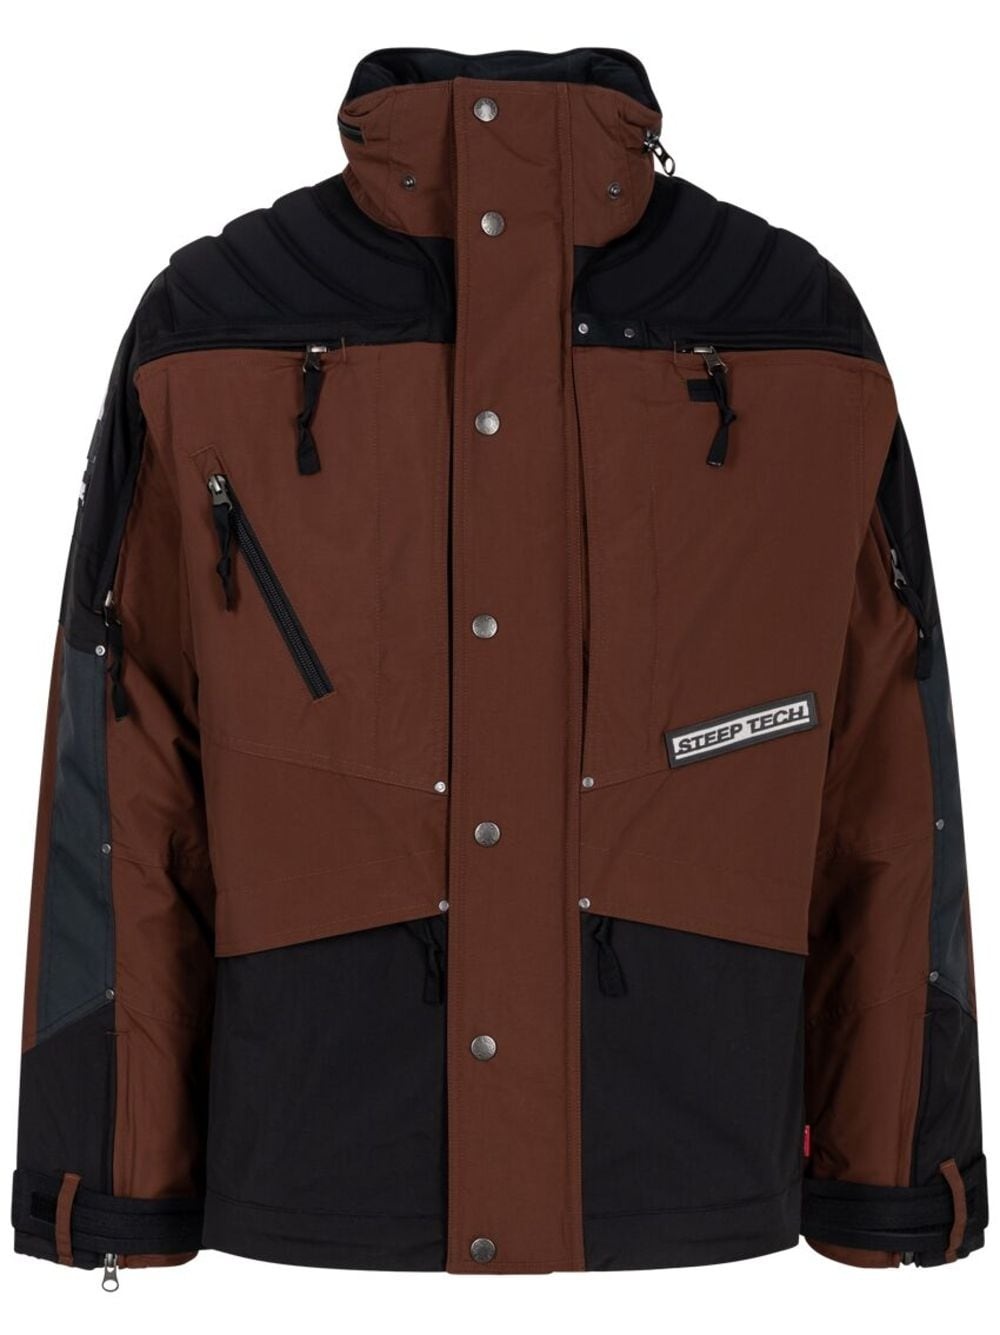 x The North Face Steep Tech Apogee "Brown" jacket - 1